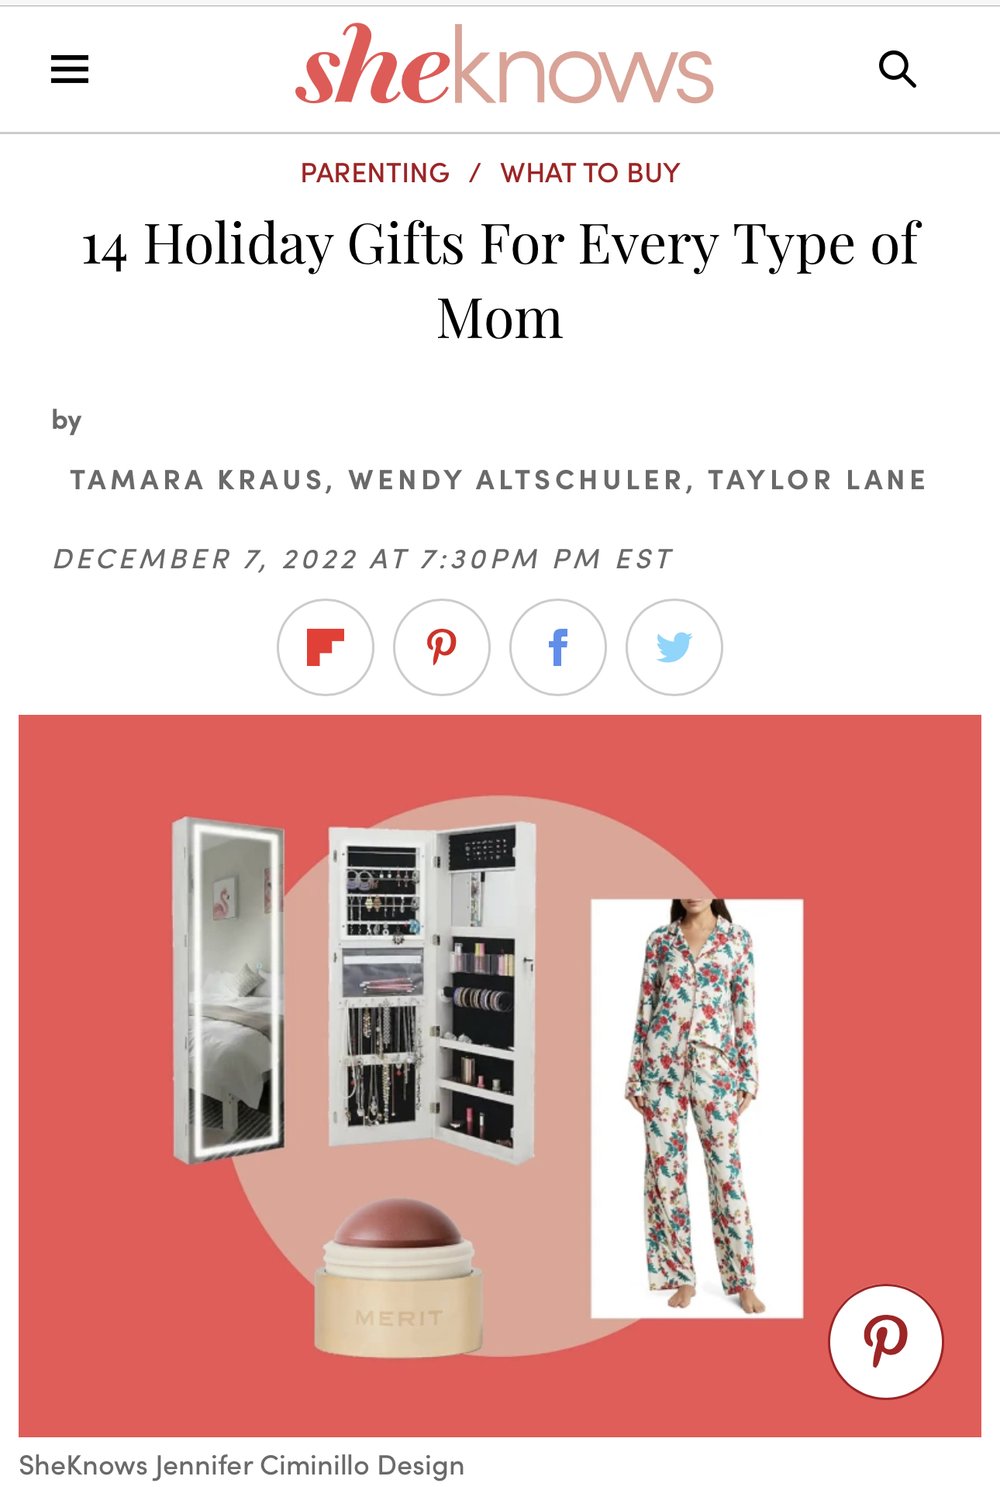 14 Holiday Gifts For Every Type of Mom